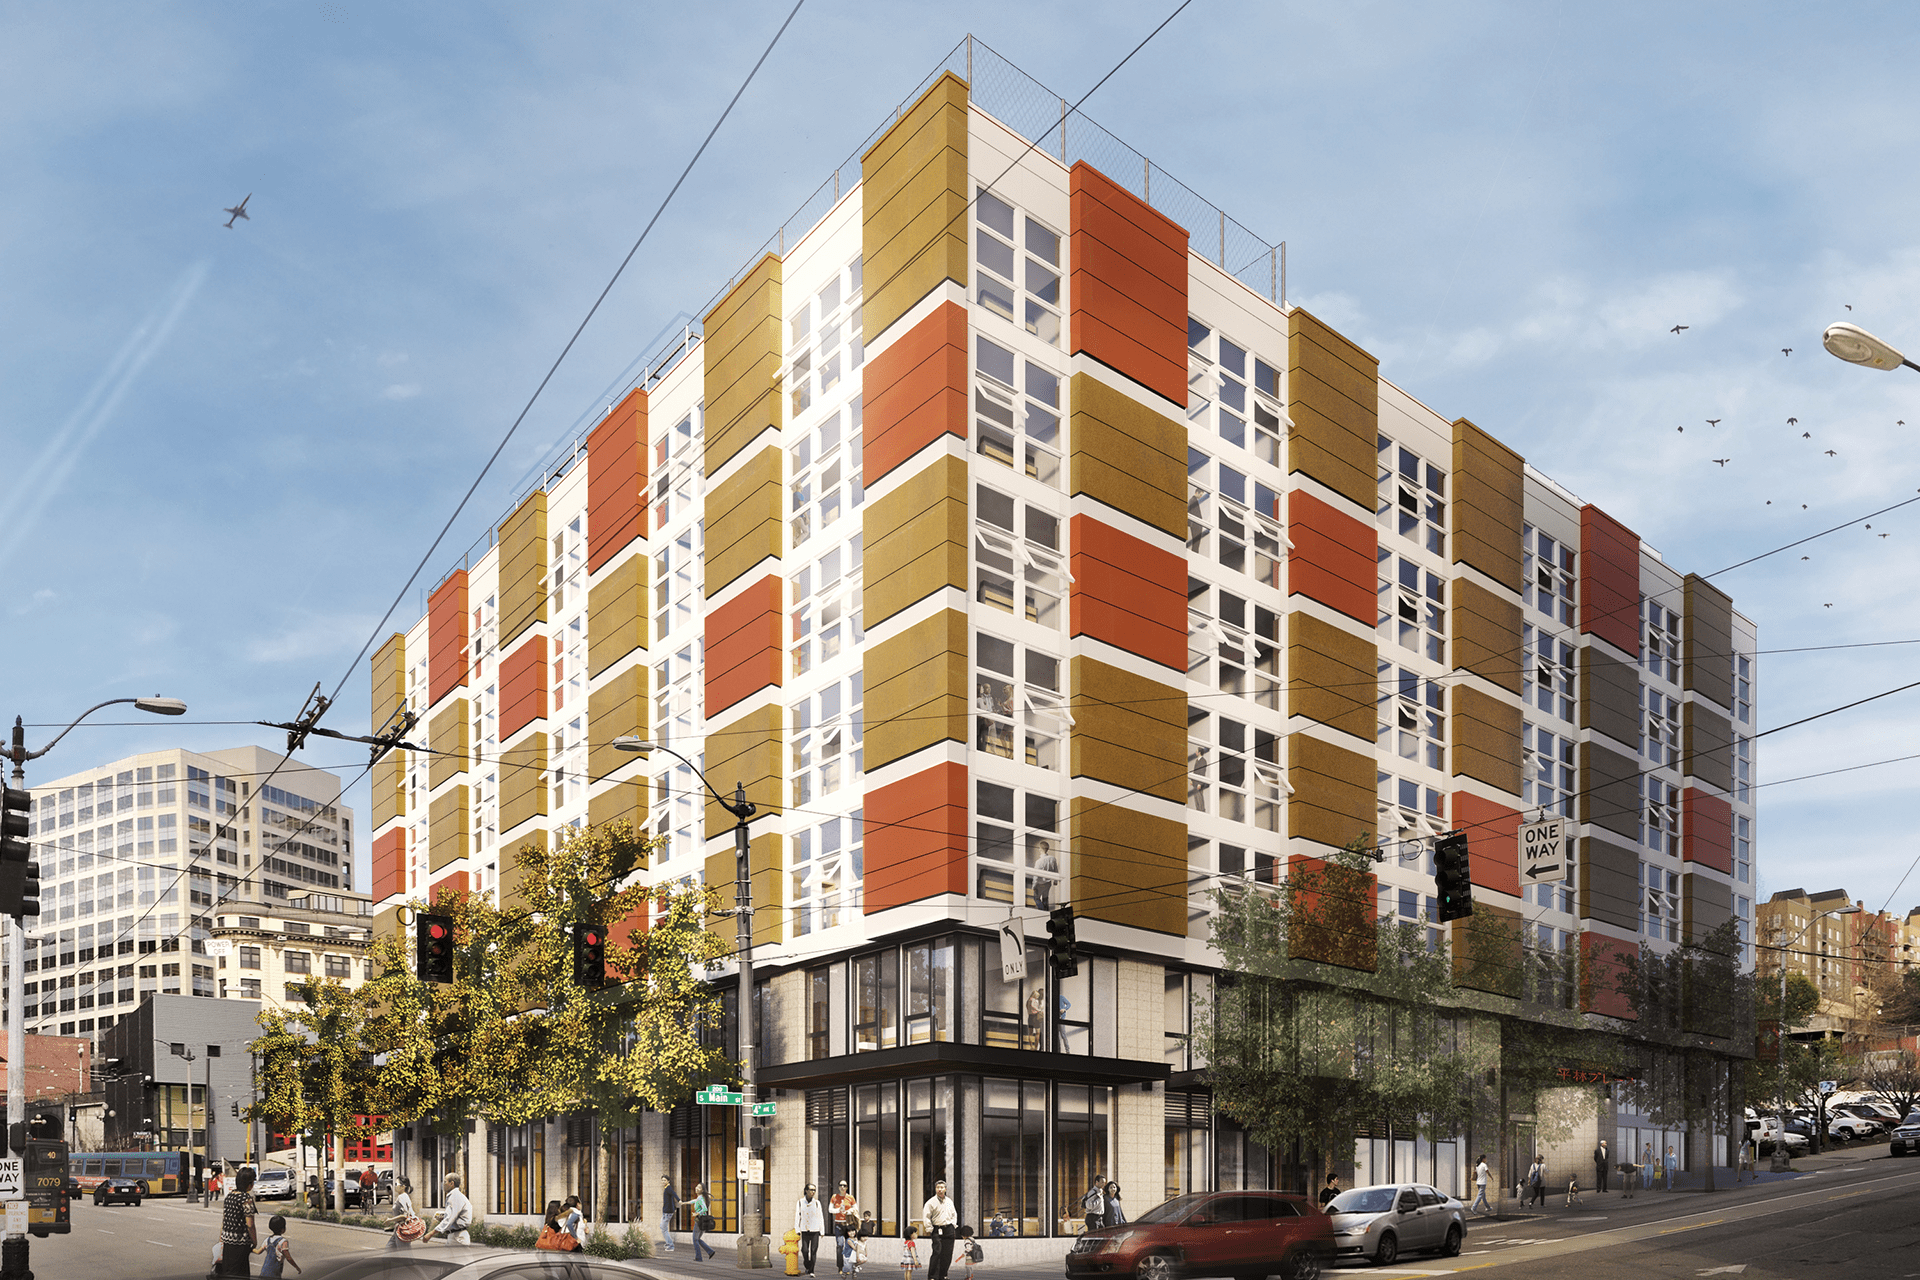 An artistic rendering of Hirabayashi Place features a playful exterior with orange and yellow siding and a ground floor for retail.